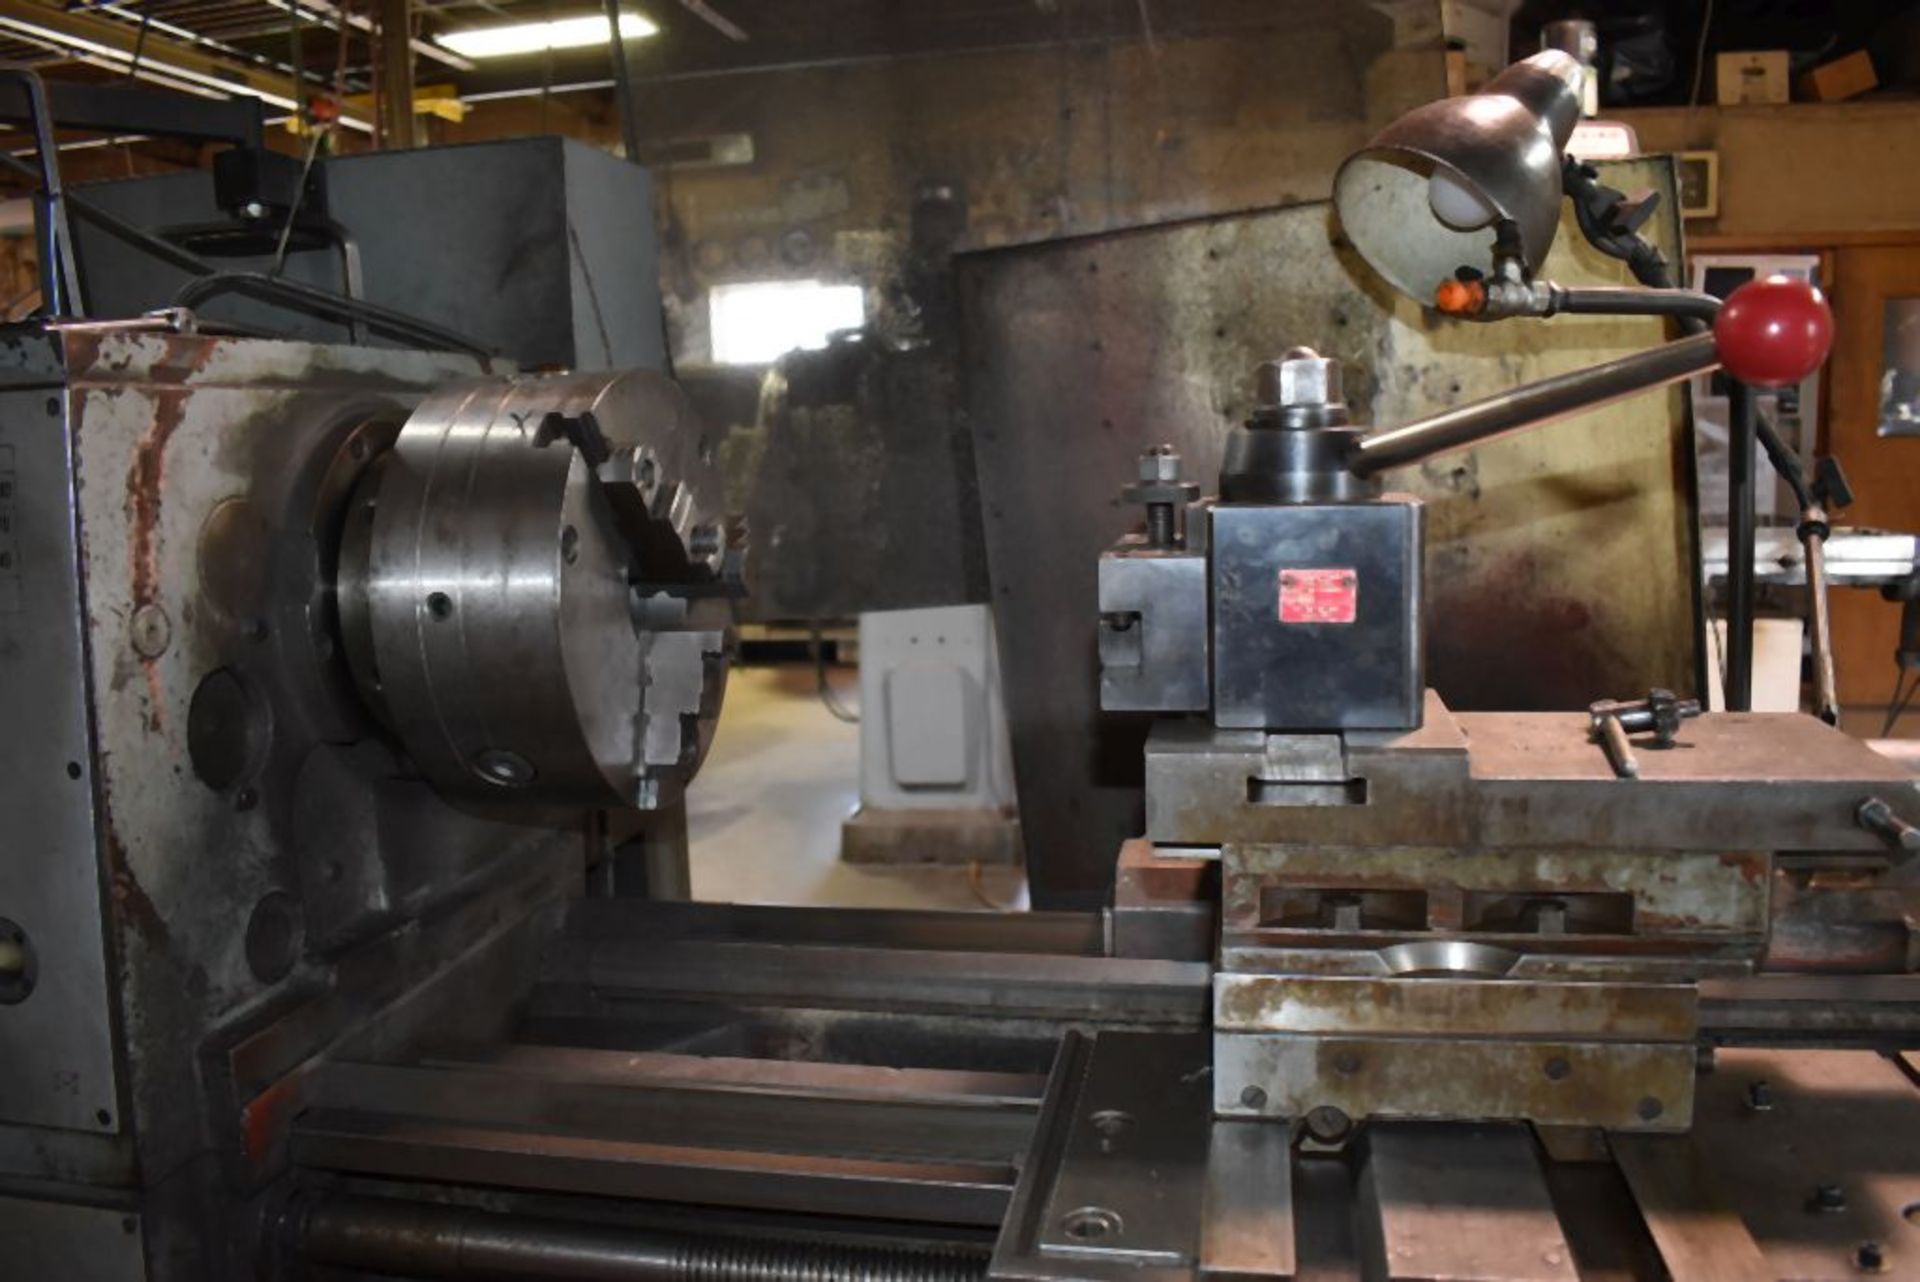 (1994) TOOLMEX (POLAND) ENGINE LATHE, MODEL TUR-630M, S/N: 50443, 12" 3-JAW CHUCK, 4" SPINDLE BORE - Image 2 of 5